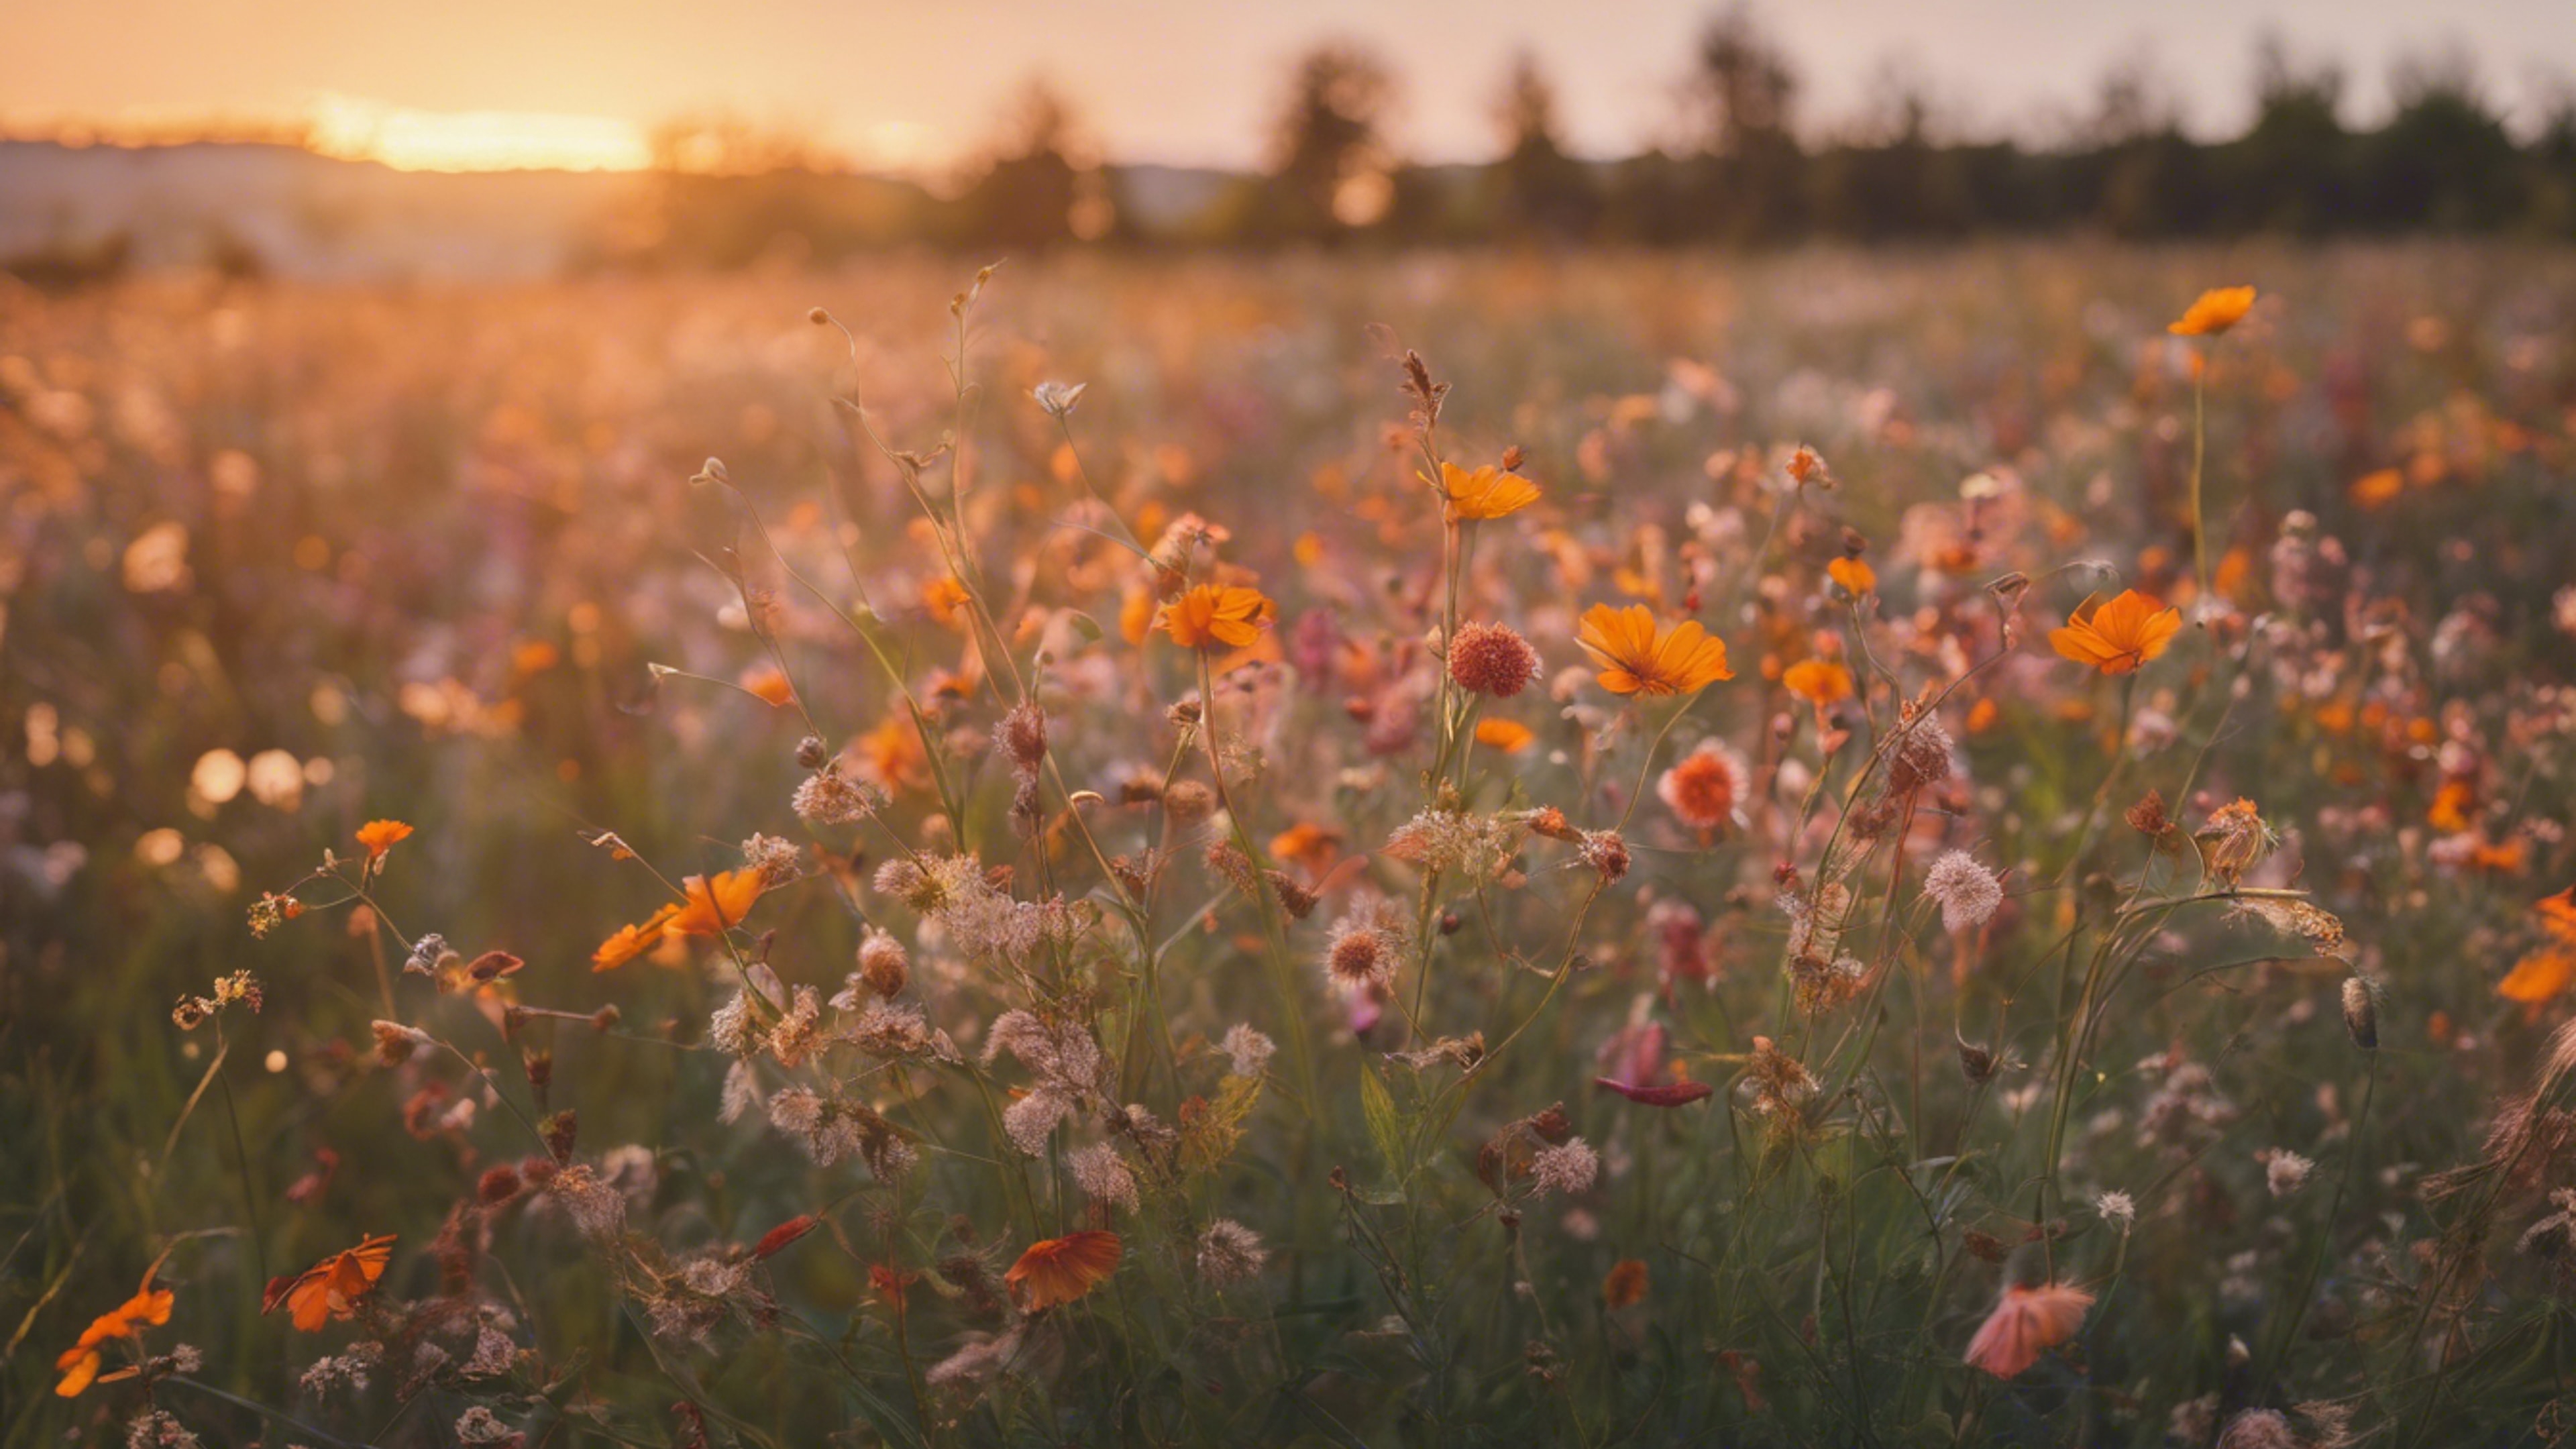 A nostalgic field of wildflowers in sunset hues. Тапет[1a5d684a5d8746a6914f]